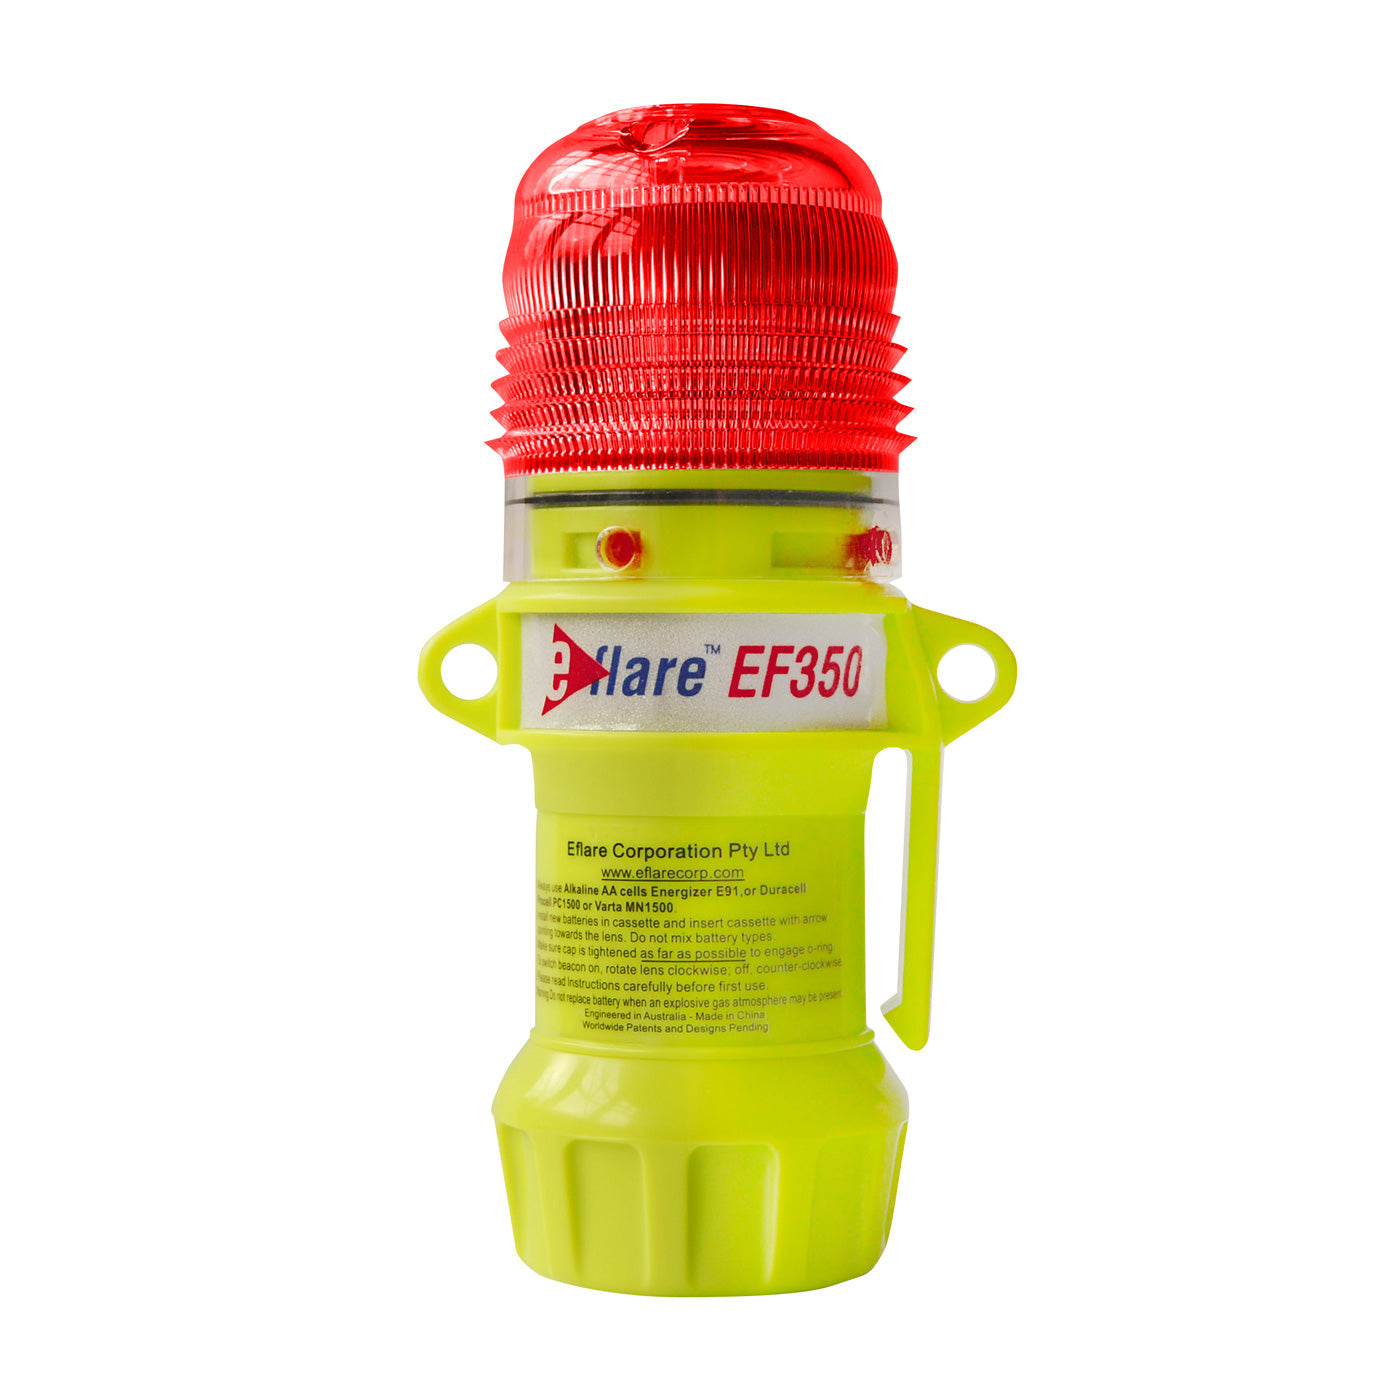 Protective Industrial Products-E-FLARE SAFETY & EMERGENCY BEACON